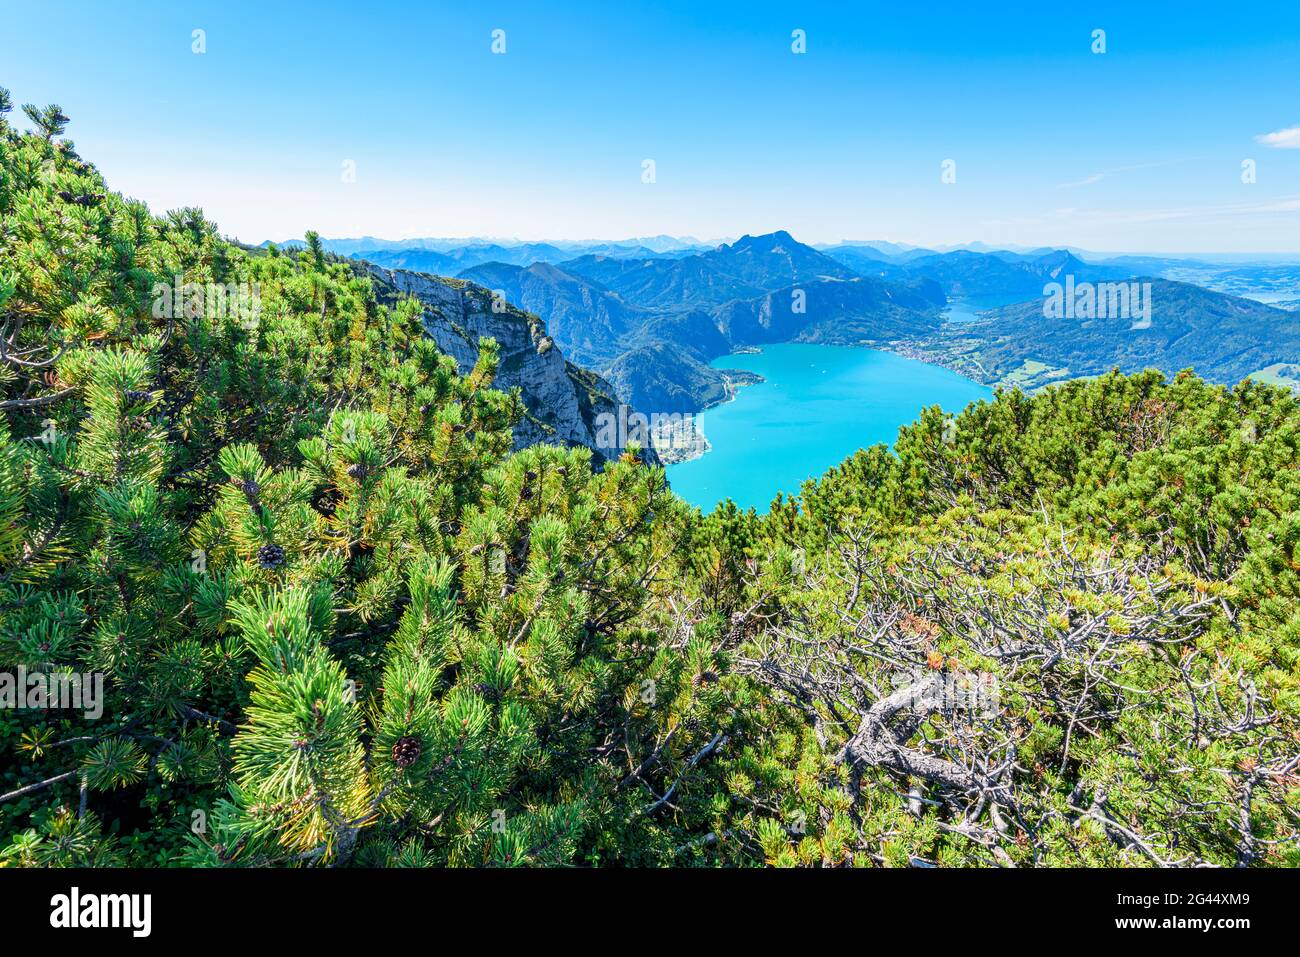 Mountain pines in the Höllengebirge and view of the Attersee, the Schafberg and the Mondsee in the Salzkammergut, Austria Stock Photo